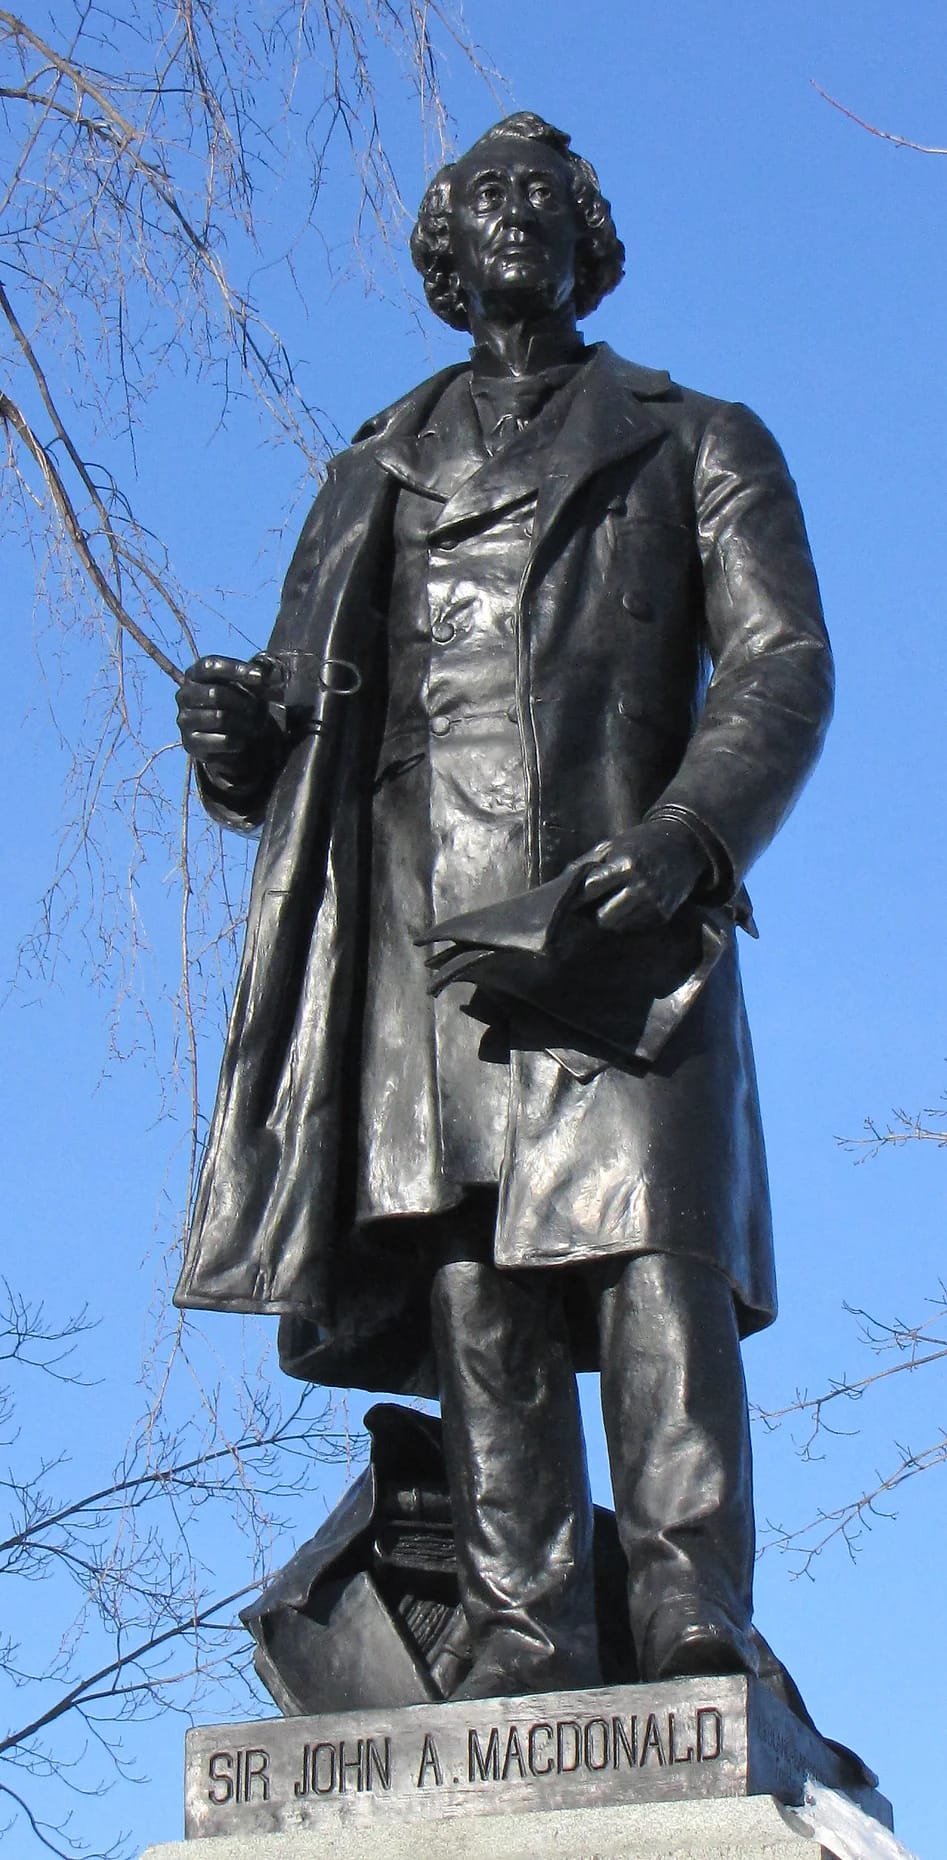 Picture of the statue of a man with a waistcoat and jacket.